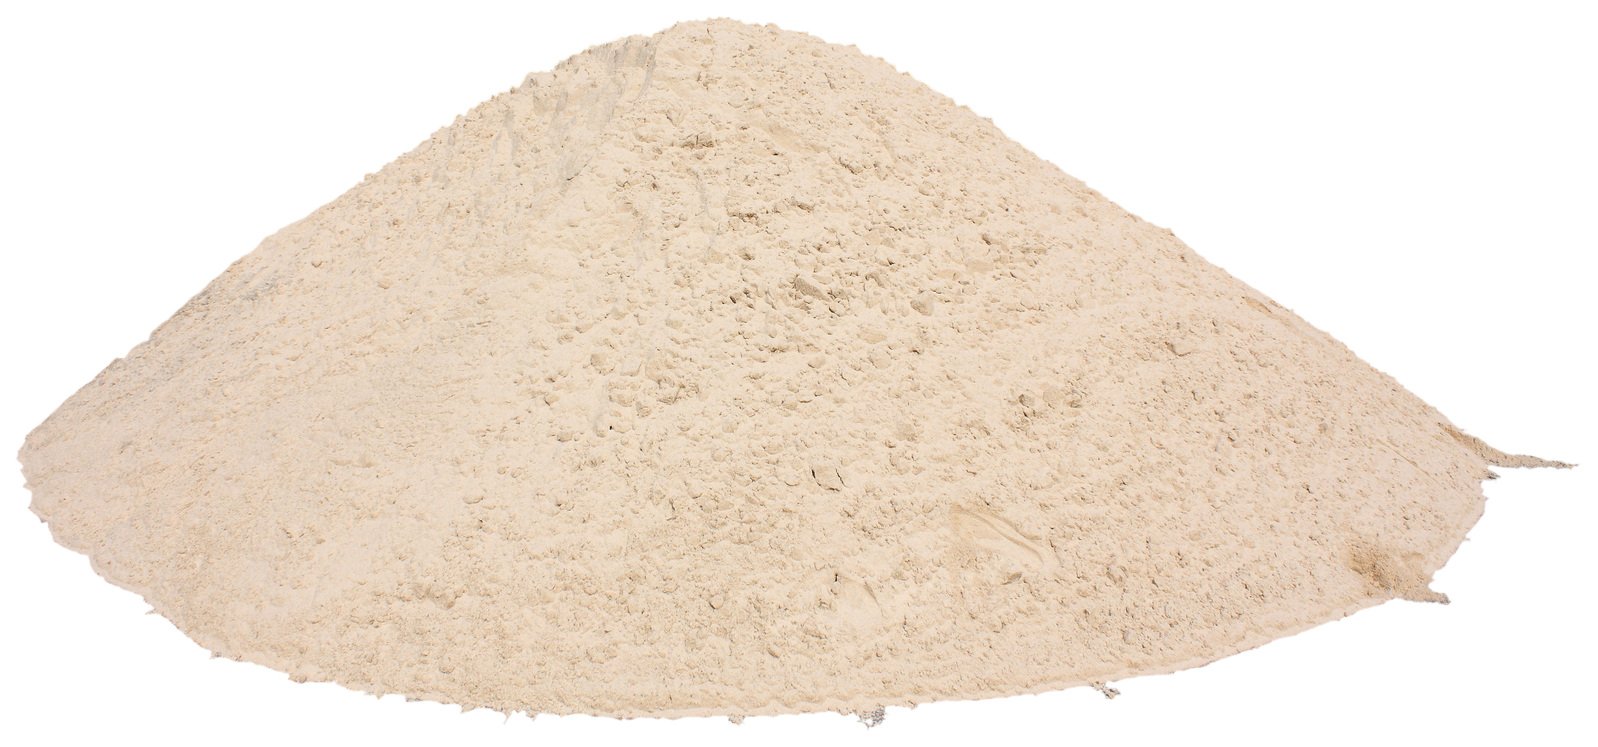 a sand pile against a white background